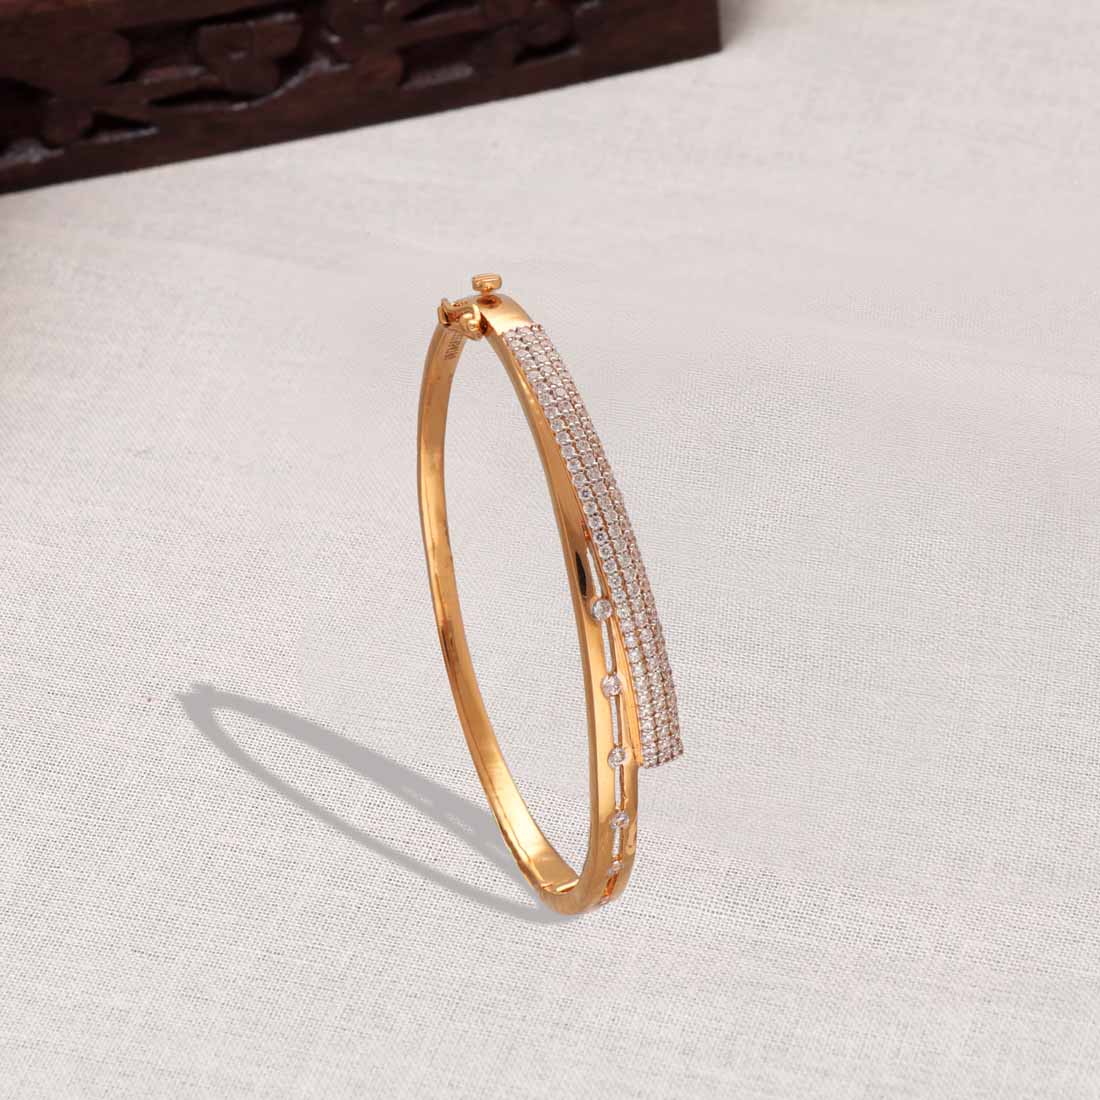 1 Gram Gold Forming Ring into Ring Fashionable Design Chain for Men and  Alluring Men Bracelets,